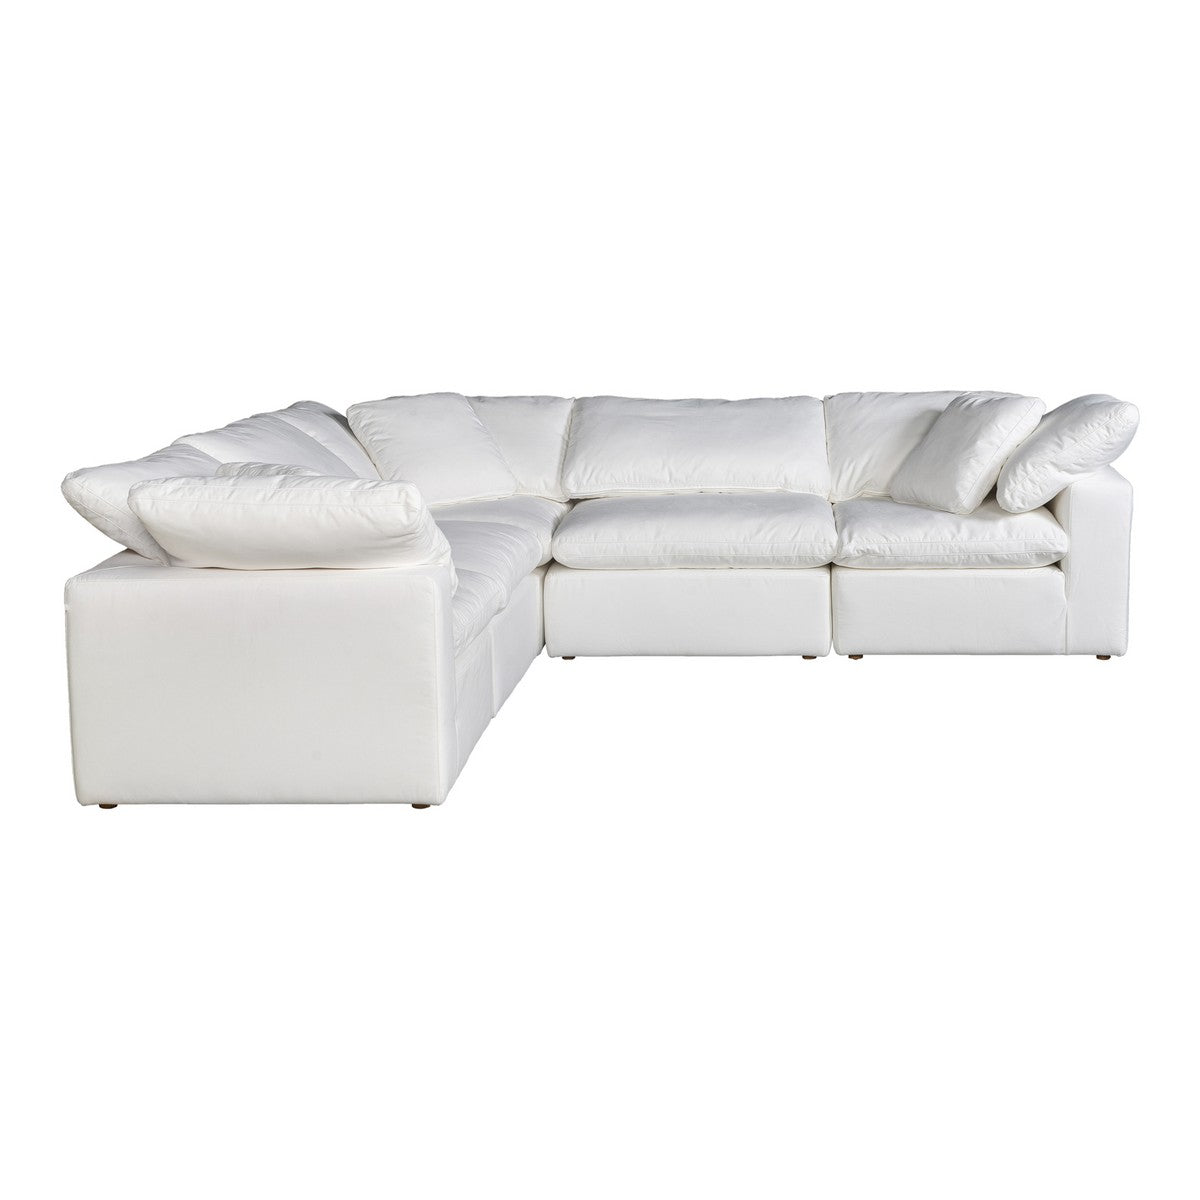 Moe's Home Collection Terra Condo Classic L Modular Sectional Livesmart Fabric Cream - YJ-1017-05